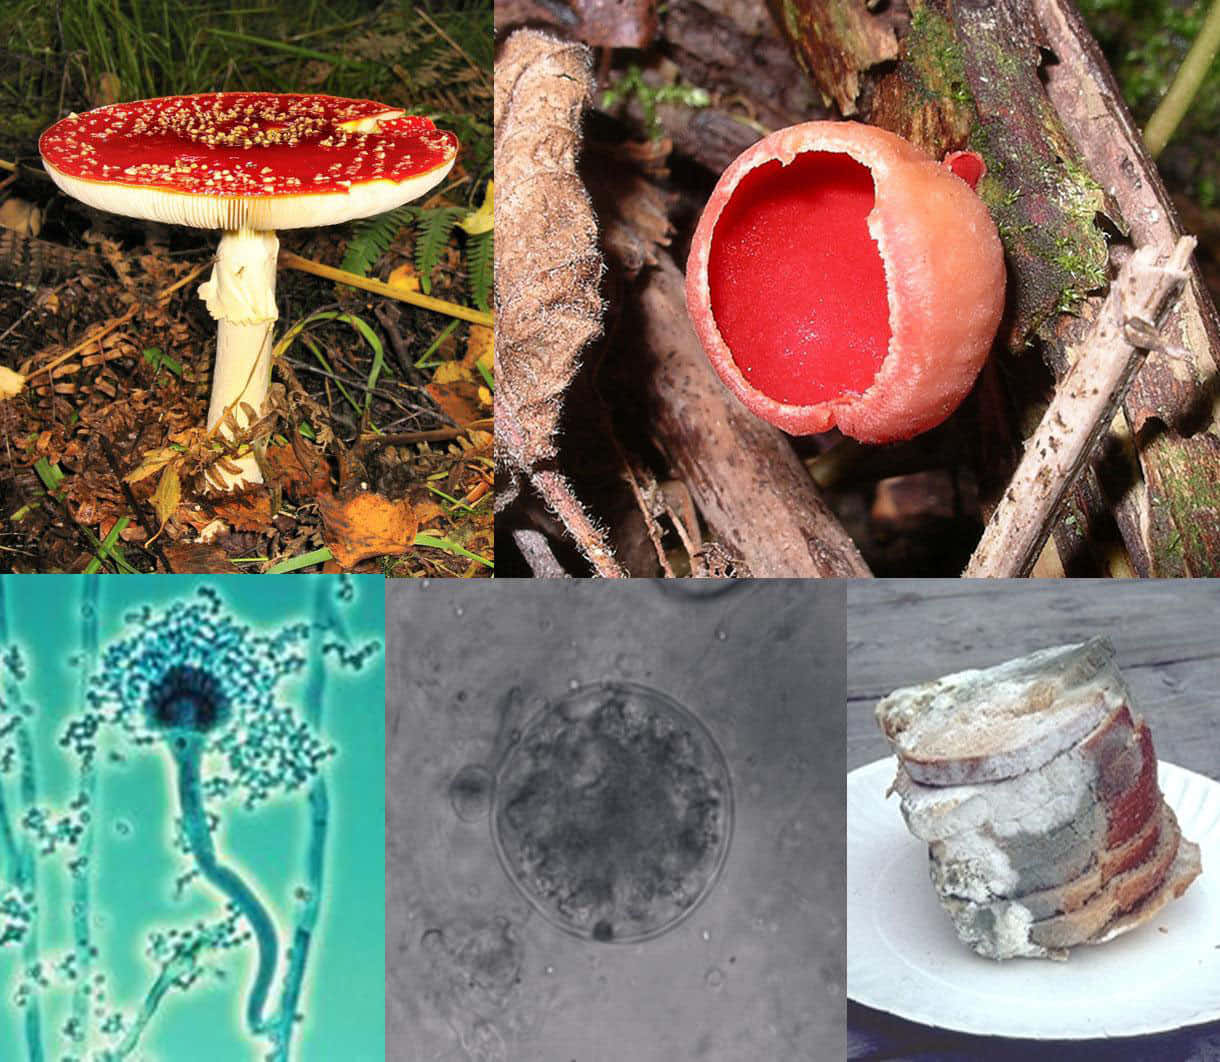 "Identifying Mushrooms: Learn the Different Types"